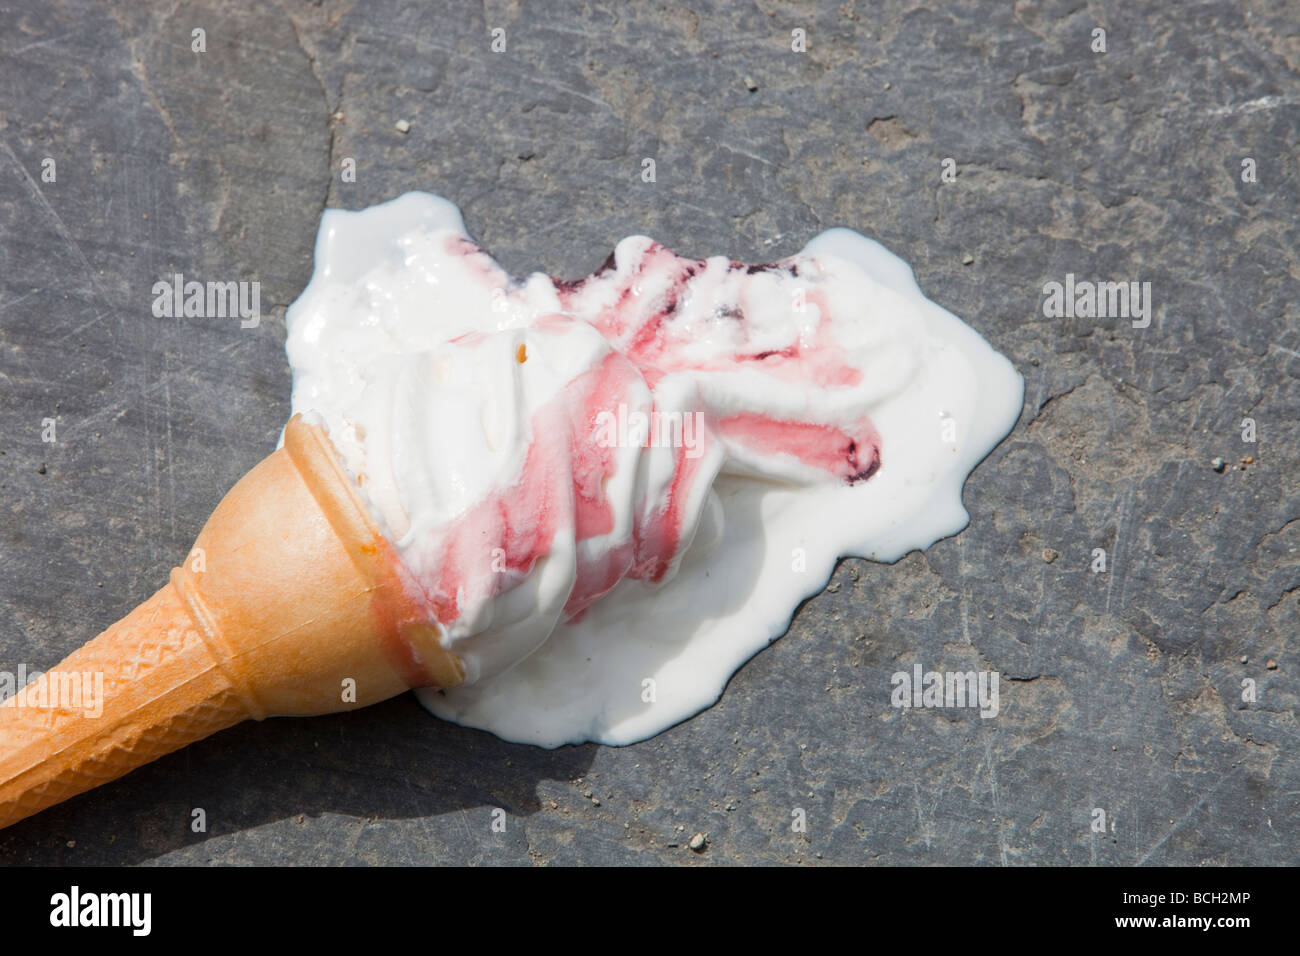 An ice cream melting on the shores of Lake Windermere Cumbria UK during a summer heat wave Stock Photo